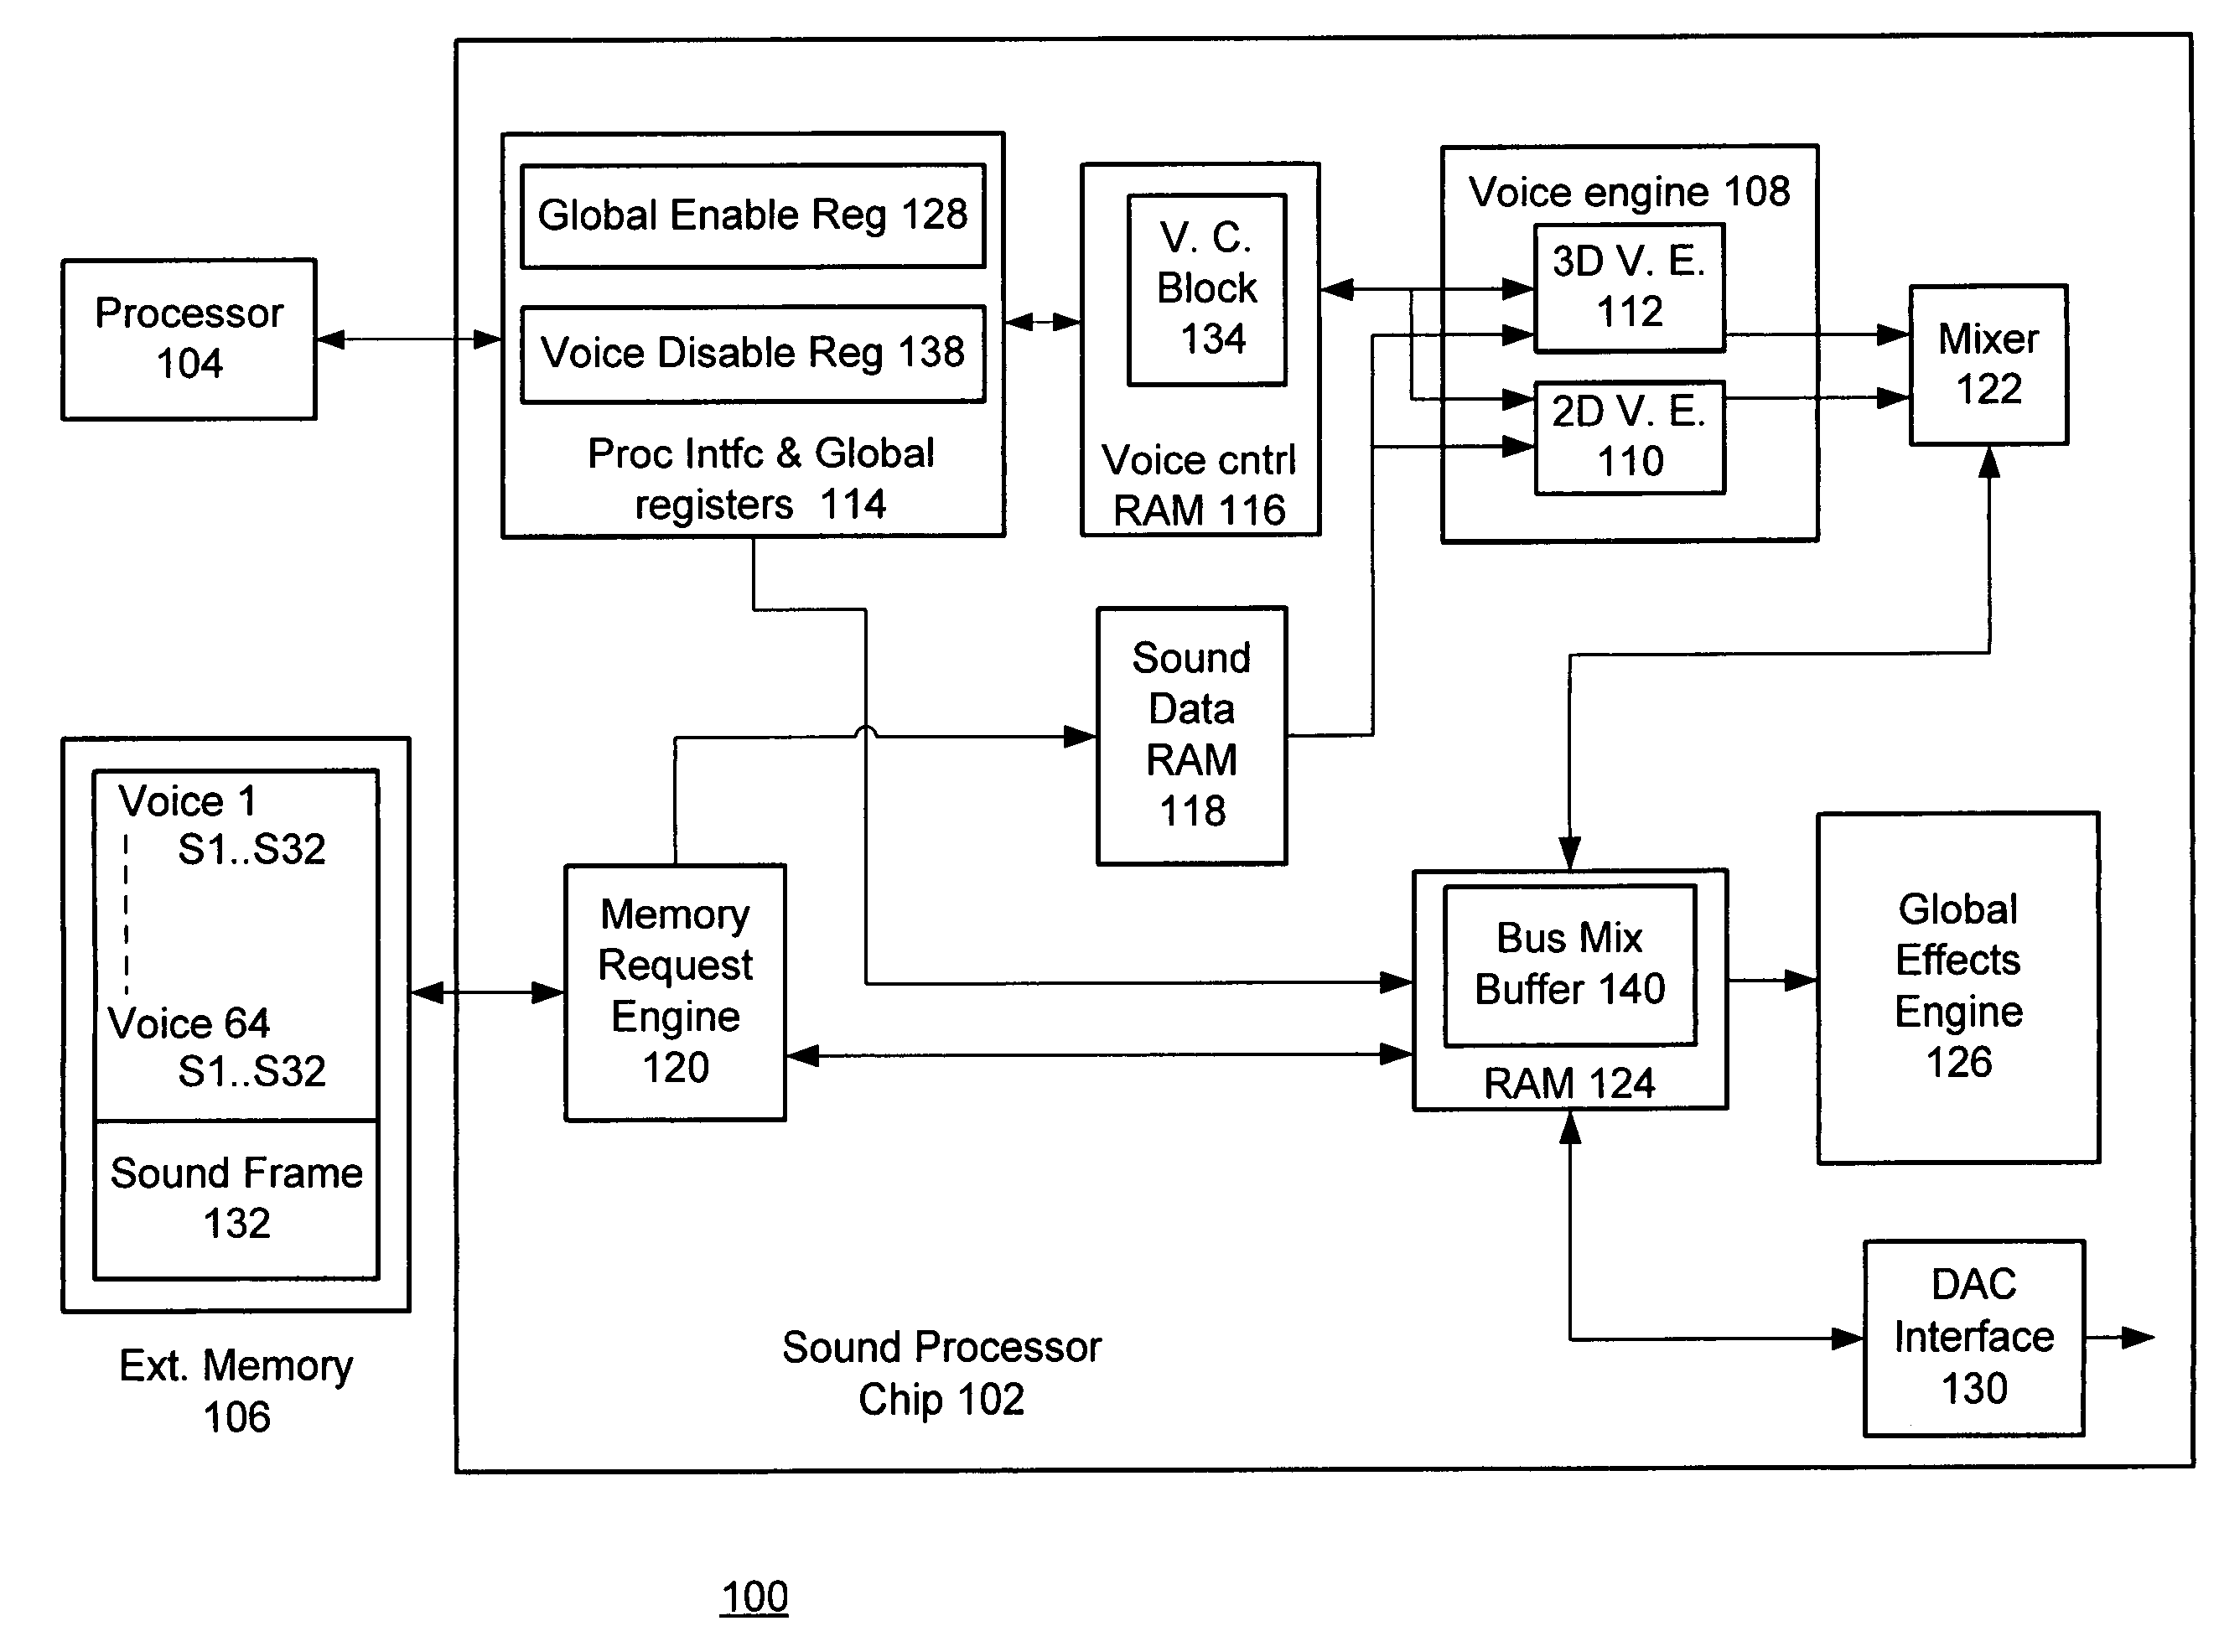 Method and system for reducing power consumption of a sound processor